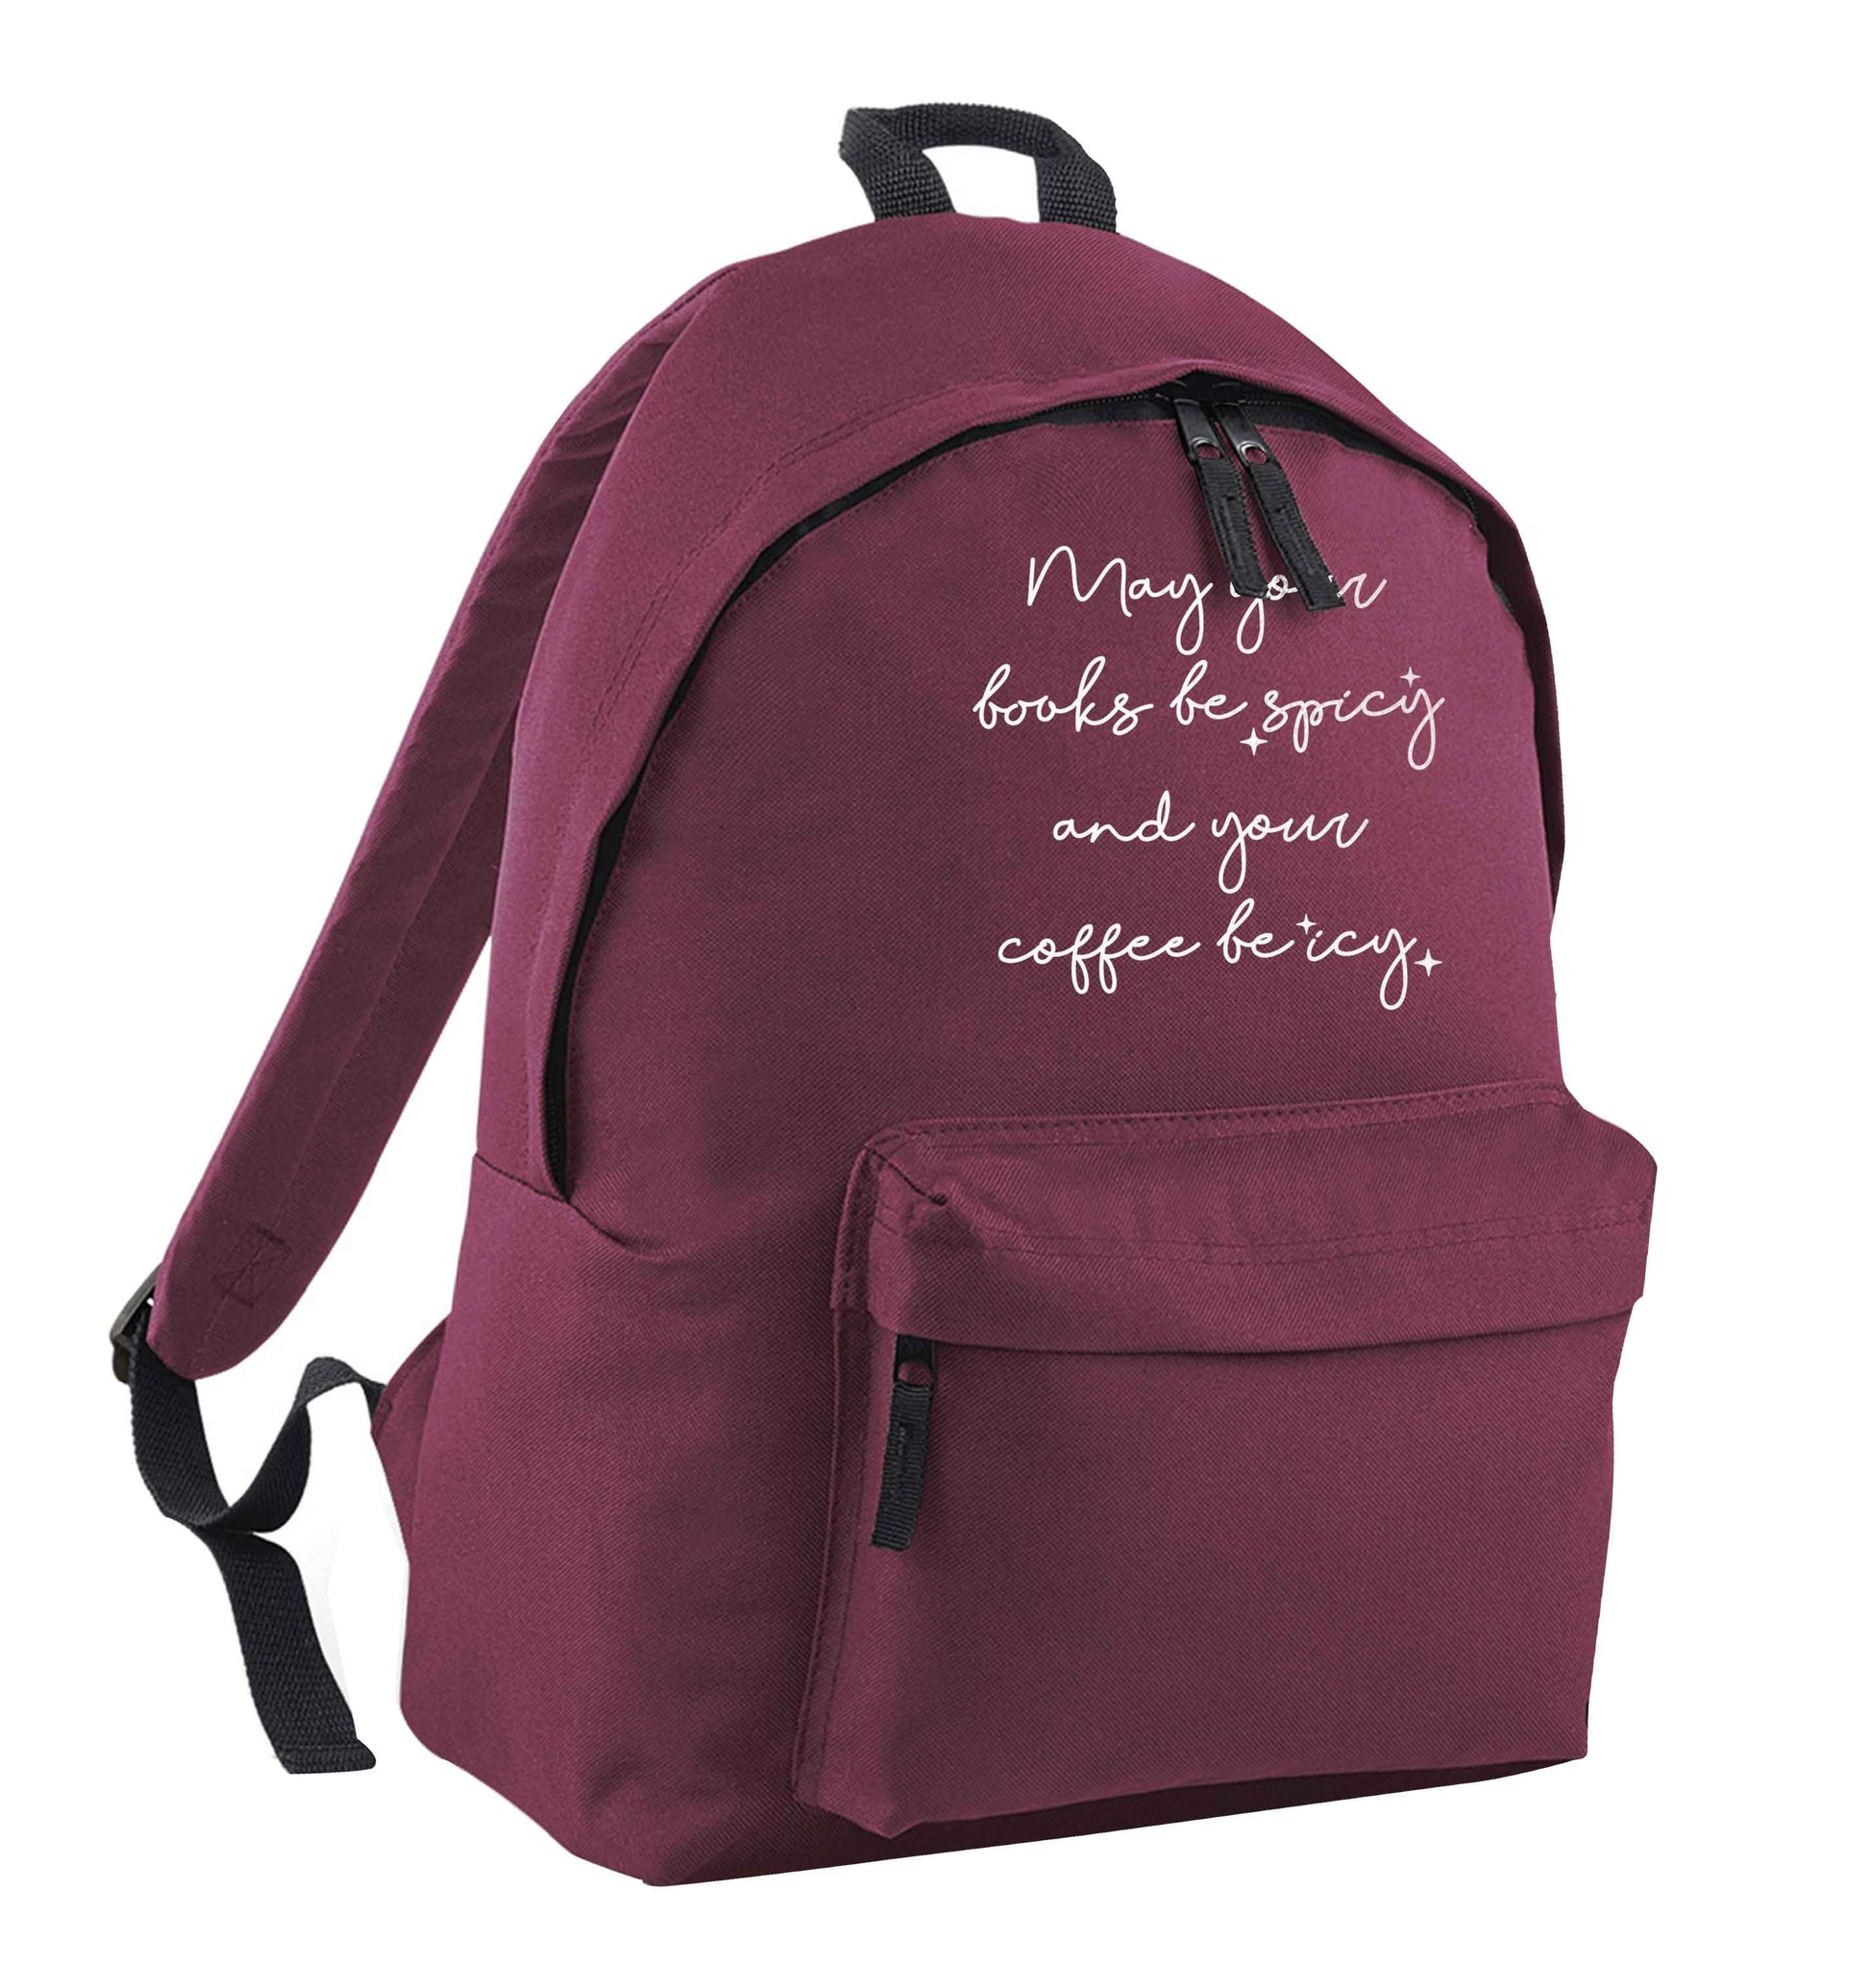 May your books be spicy and your coffee be icy maroon adults backpack